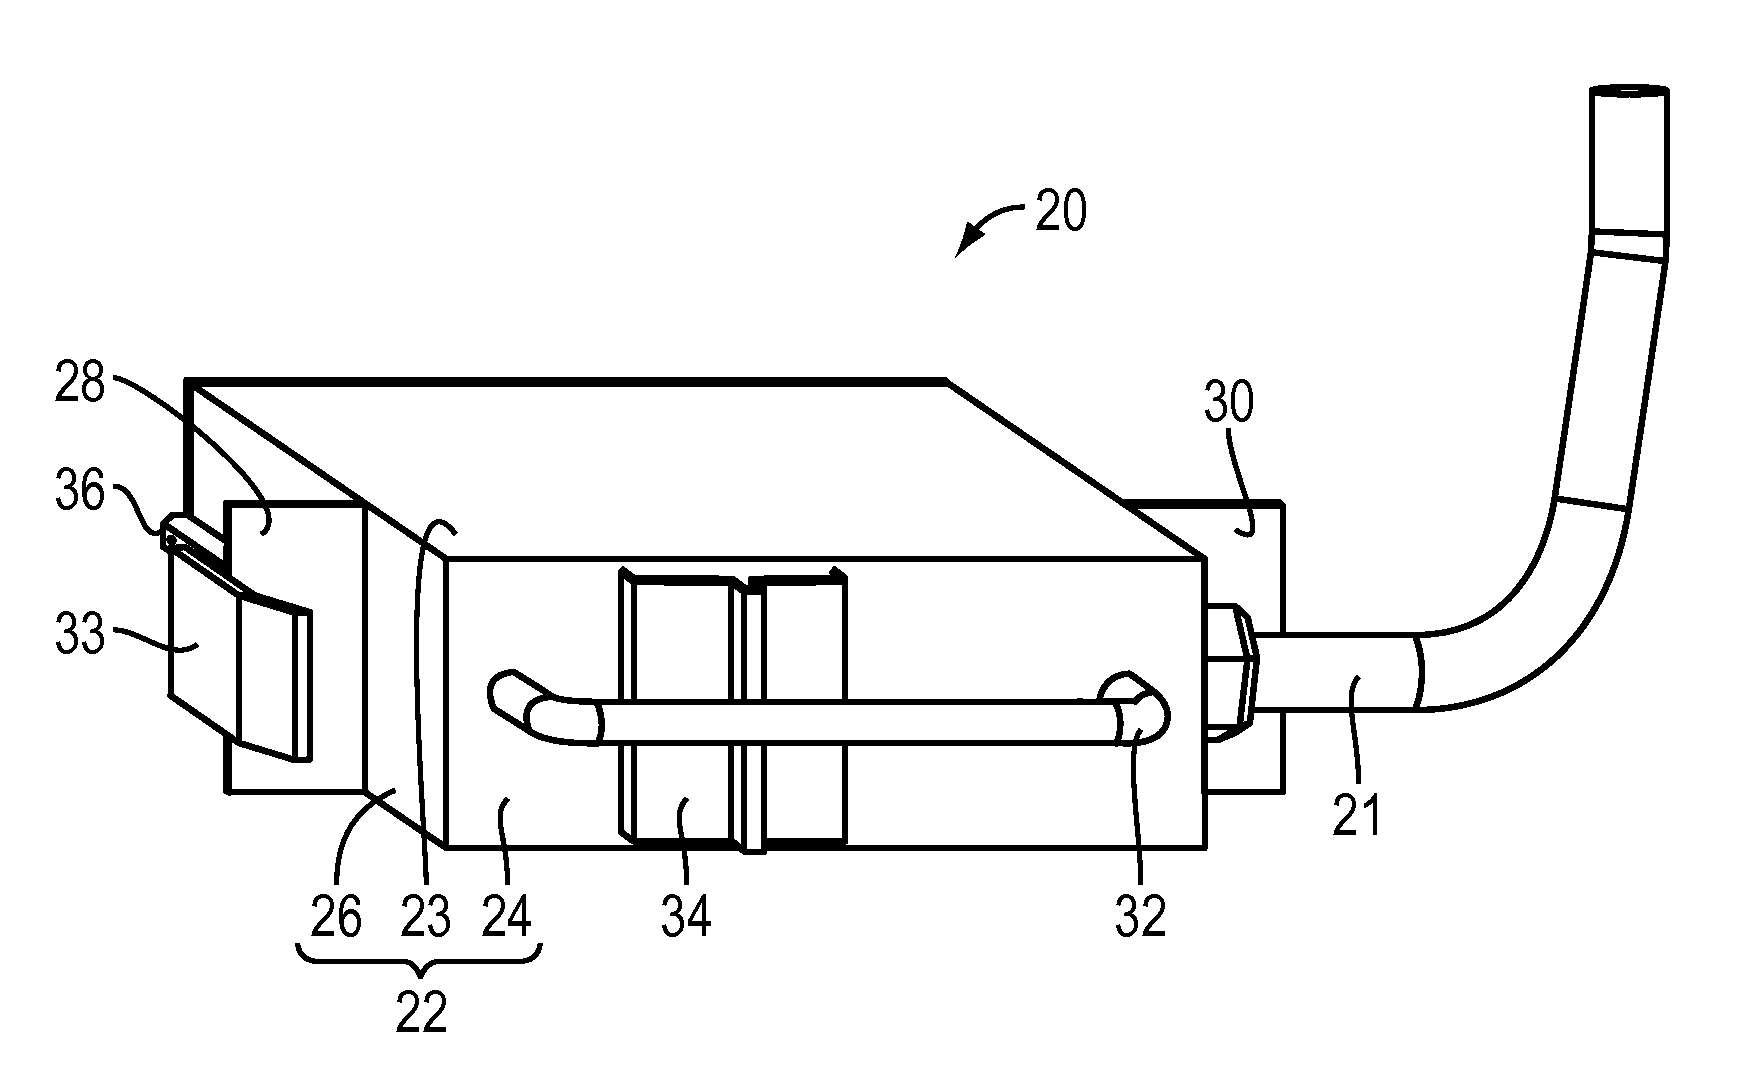 Apparatus and method for scalable power distribution